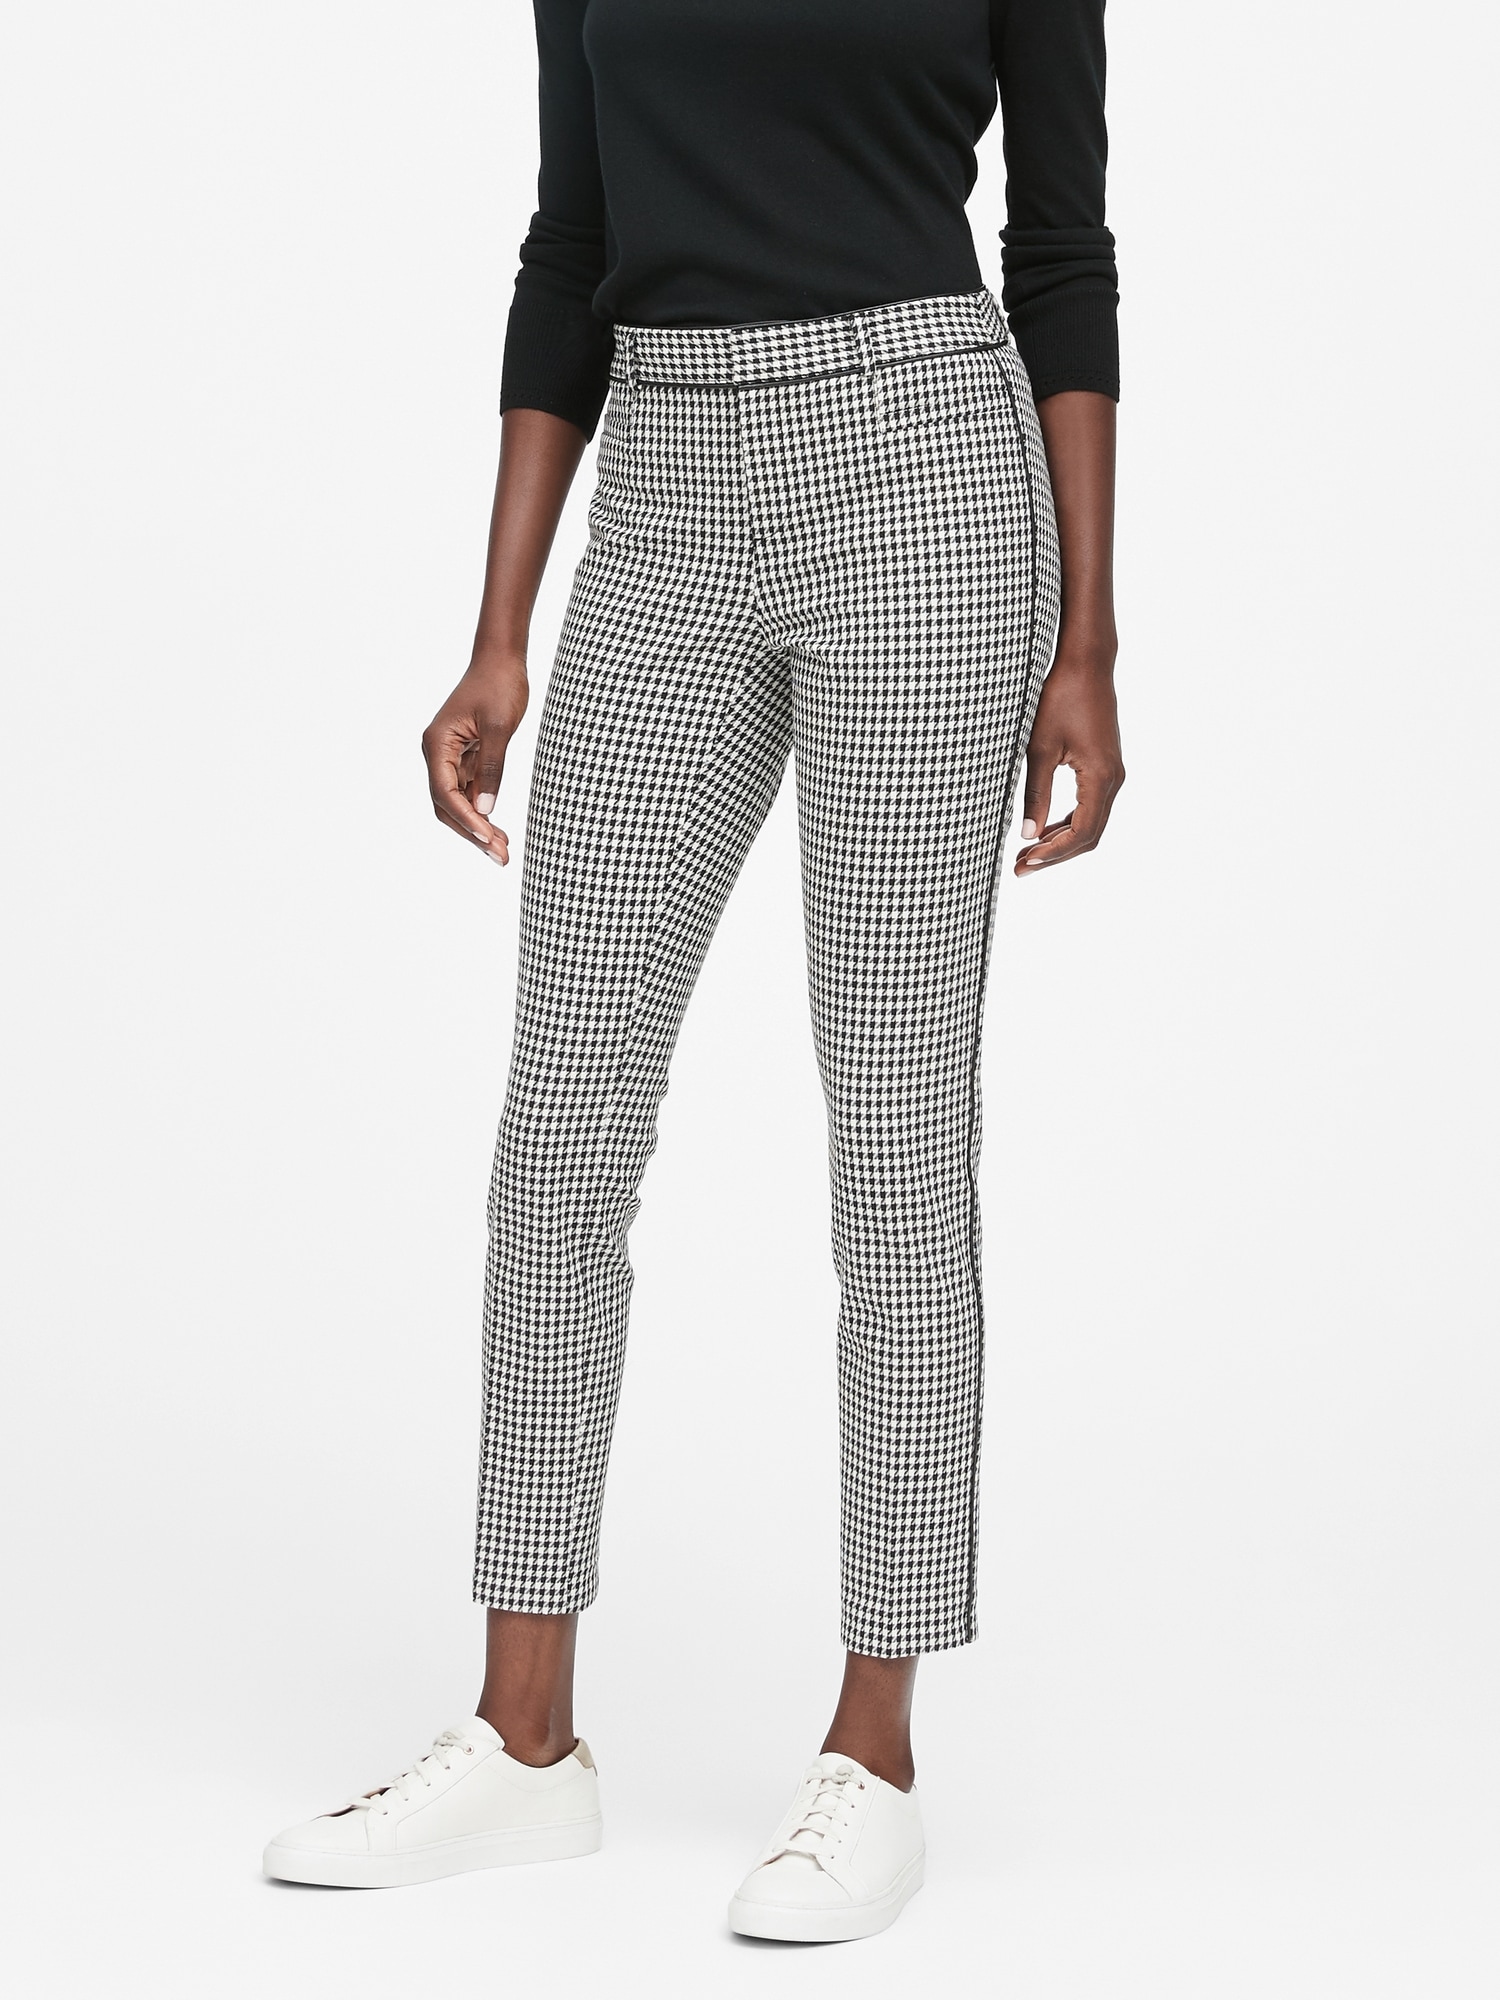 Petite Modern Sloan Skinny-Fit Washable Pant with Piping